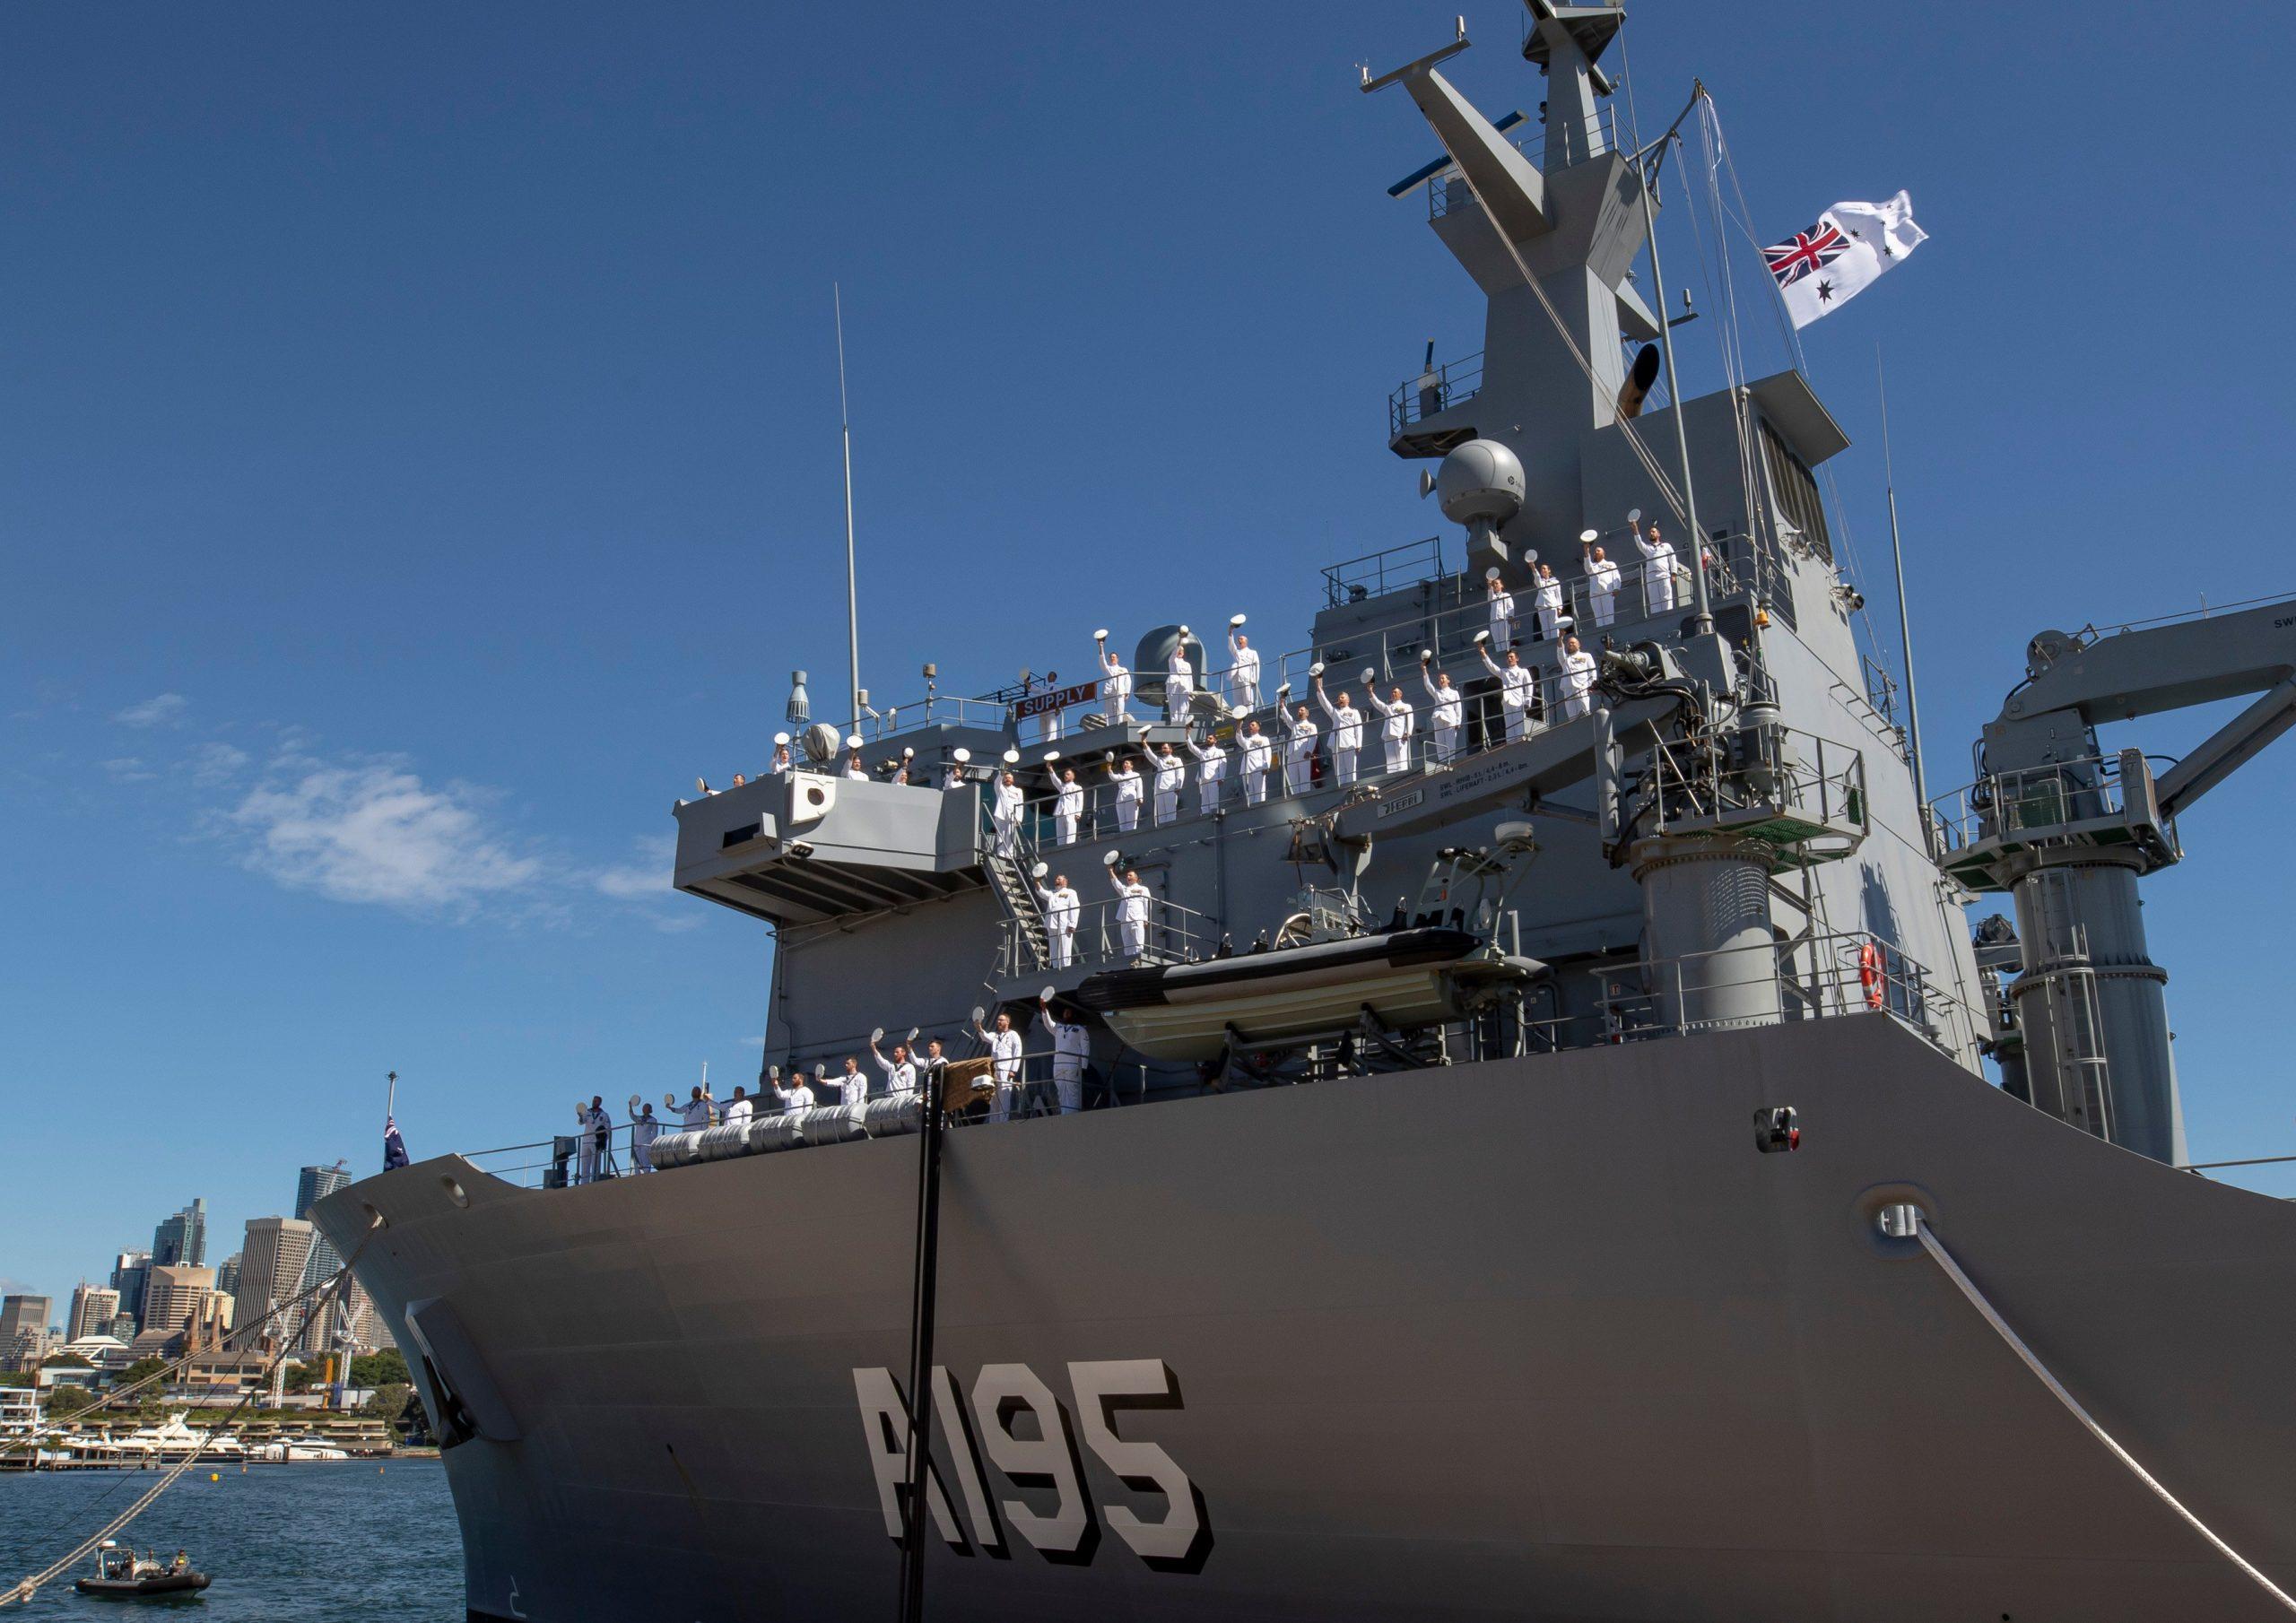 The Royal Australian Navy has commissioned  HMAS Supply into service boosting its operational support capability with the new supply ship